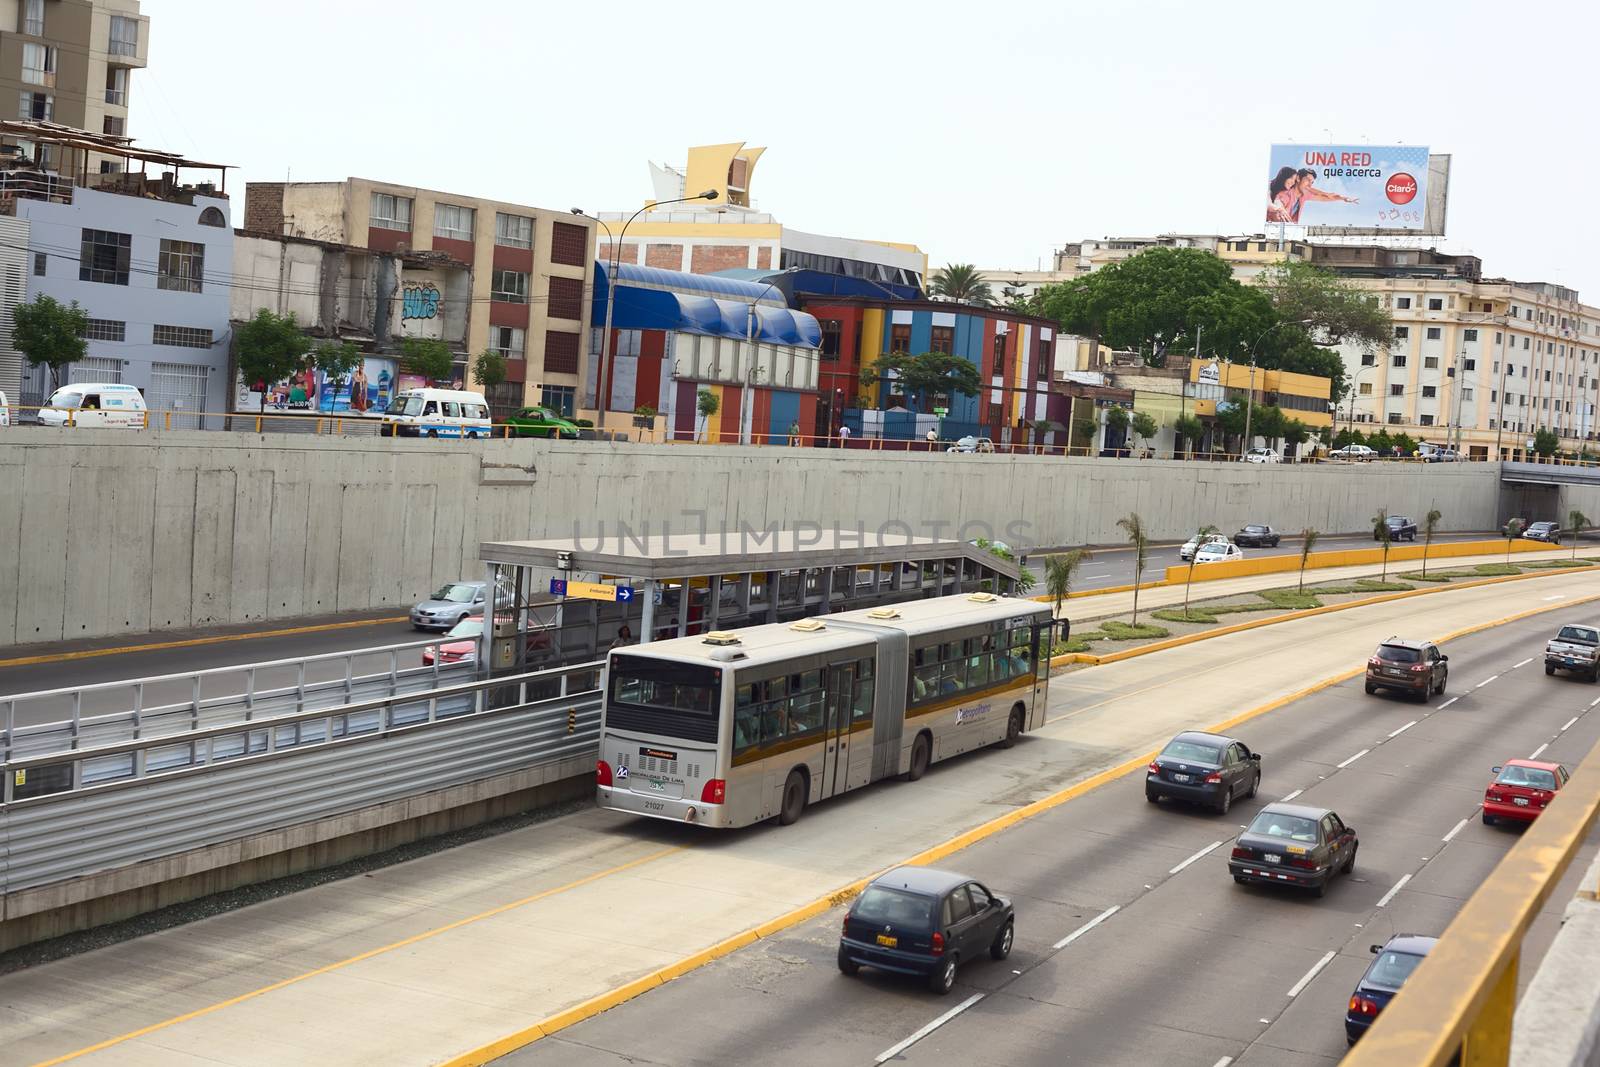 LIMA, PERU - FEBRUARY 13, 2012: Metropolitano bus stopping at Ricardo Palma Avenue in Miraflores on February 13, 2012 in Lima, Peru. The Metropolitano is a Bus rapid transit system operating since 2010 in Lima running from North to South.